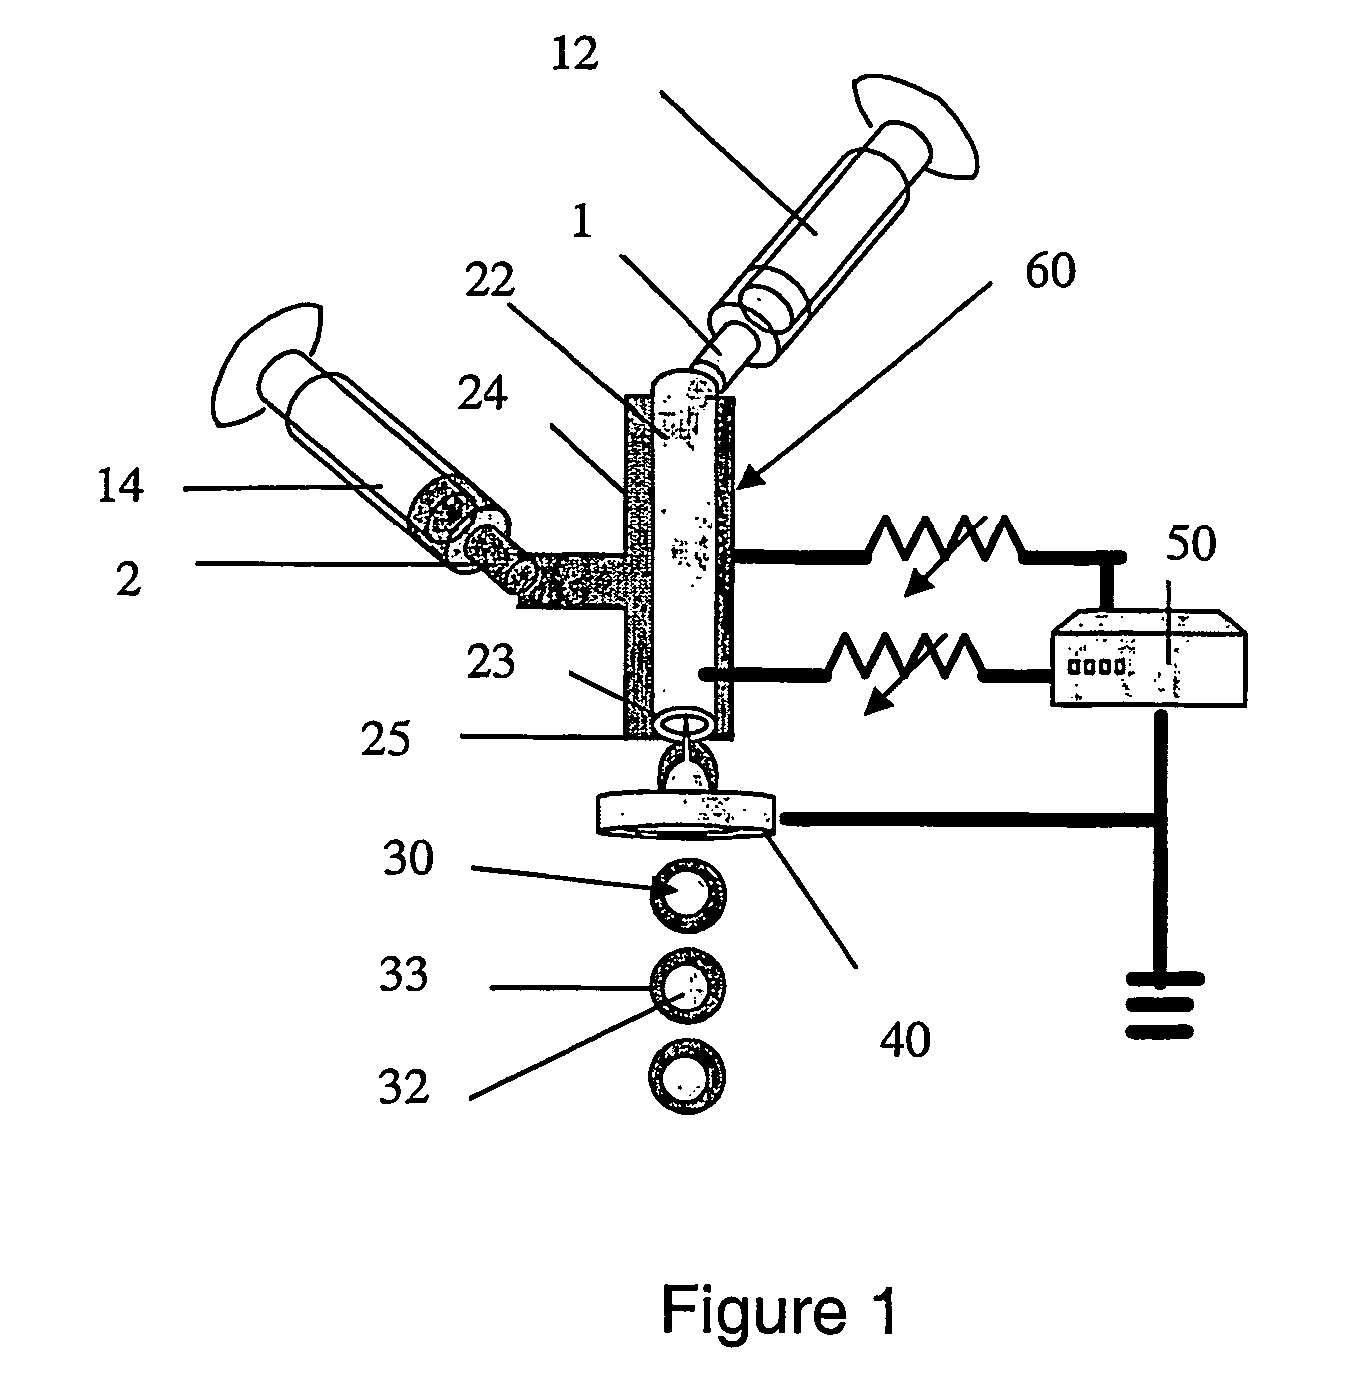 Methods and apparatus using electrostatic atomization to form liquid vesicles